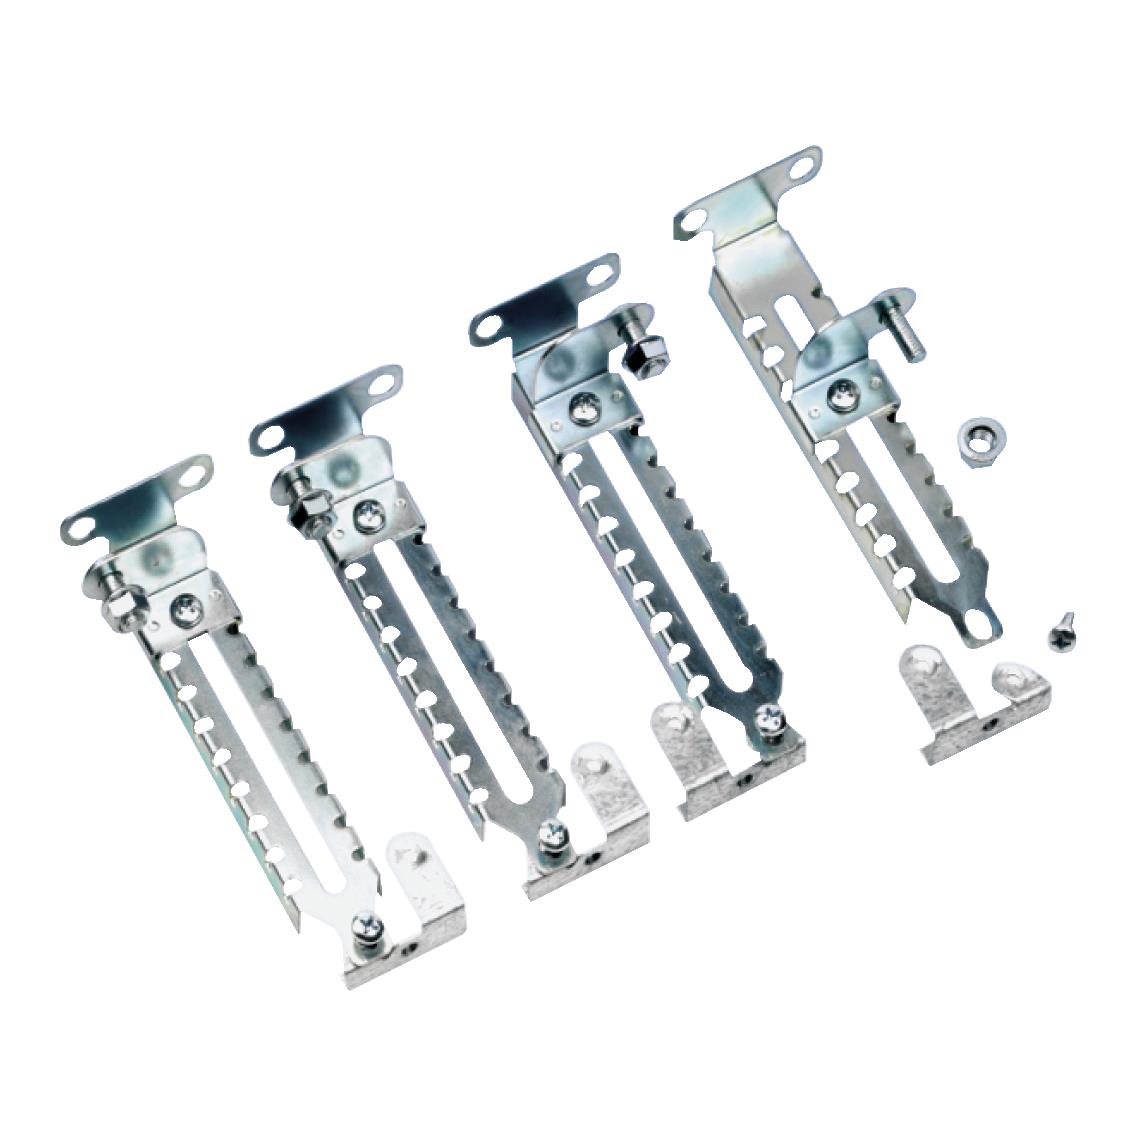 【NSYSDCR400】ADJUSTABLE SUPPORTS DEPTH 400